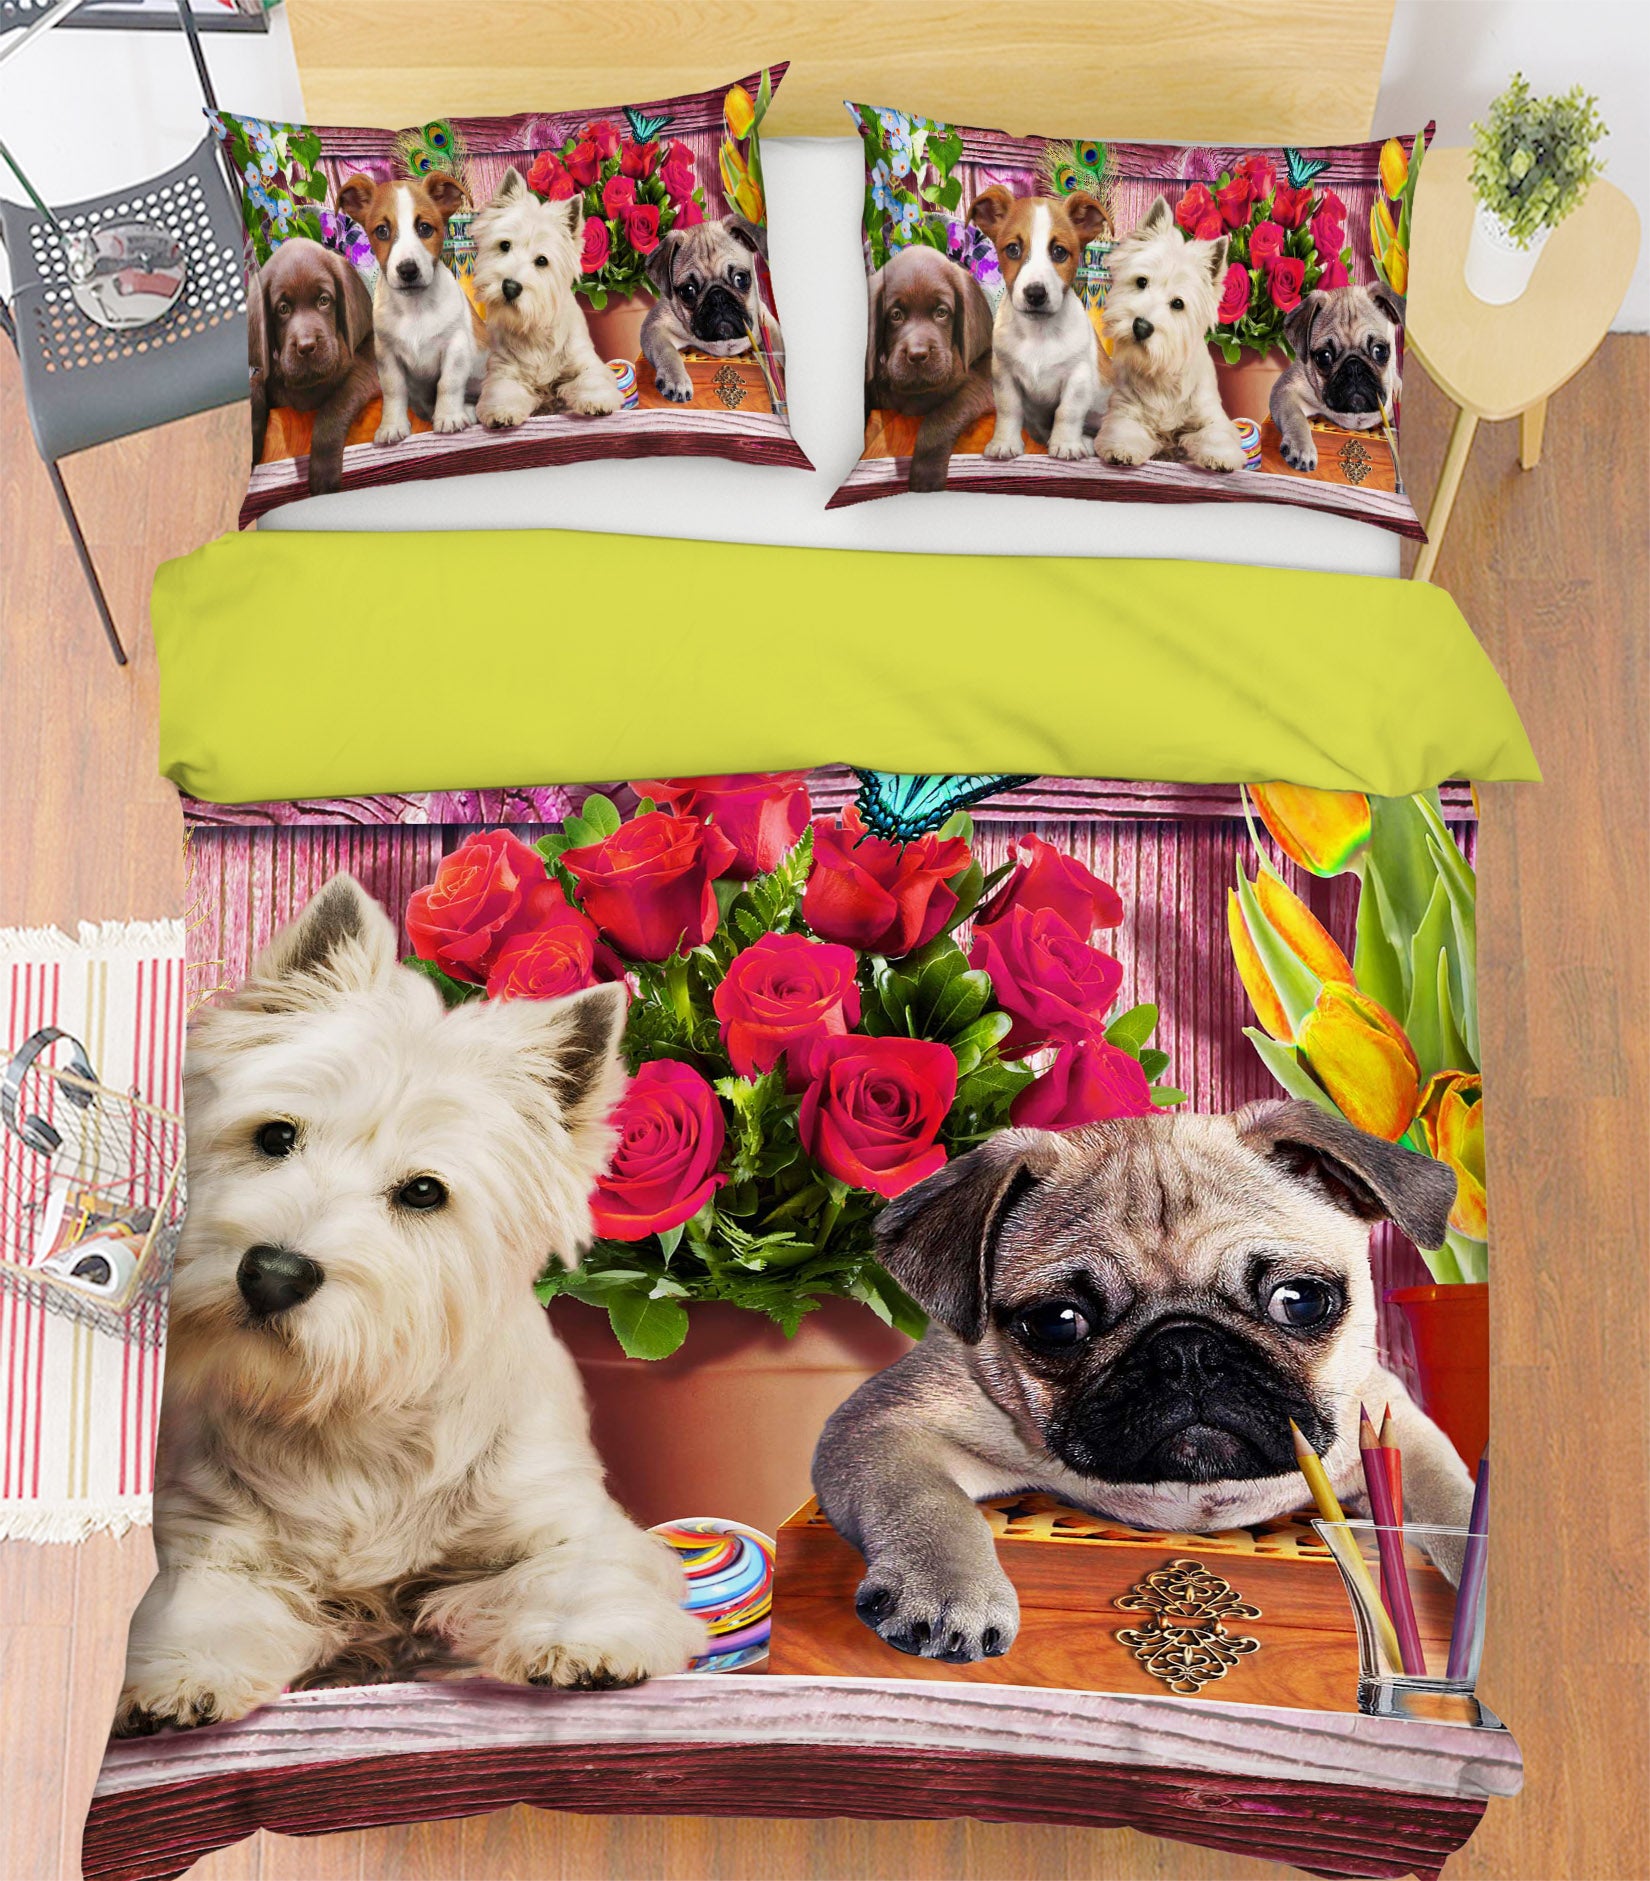 3D Cute Dog 2109 Adrian Chesterman Bedding Bed Pillowcases Quilt